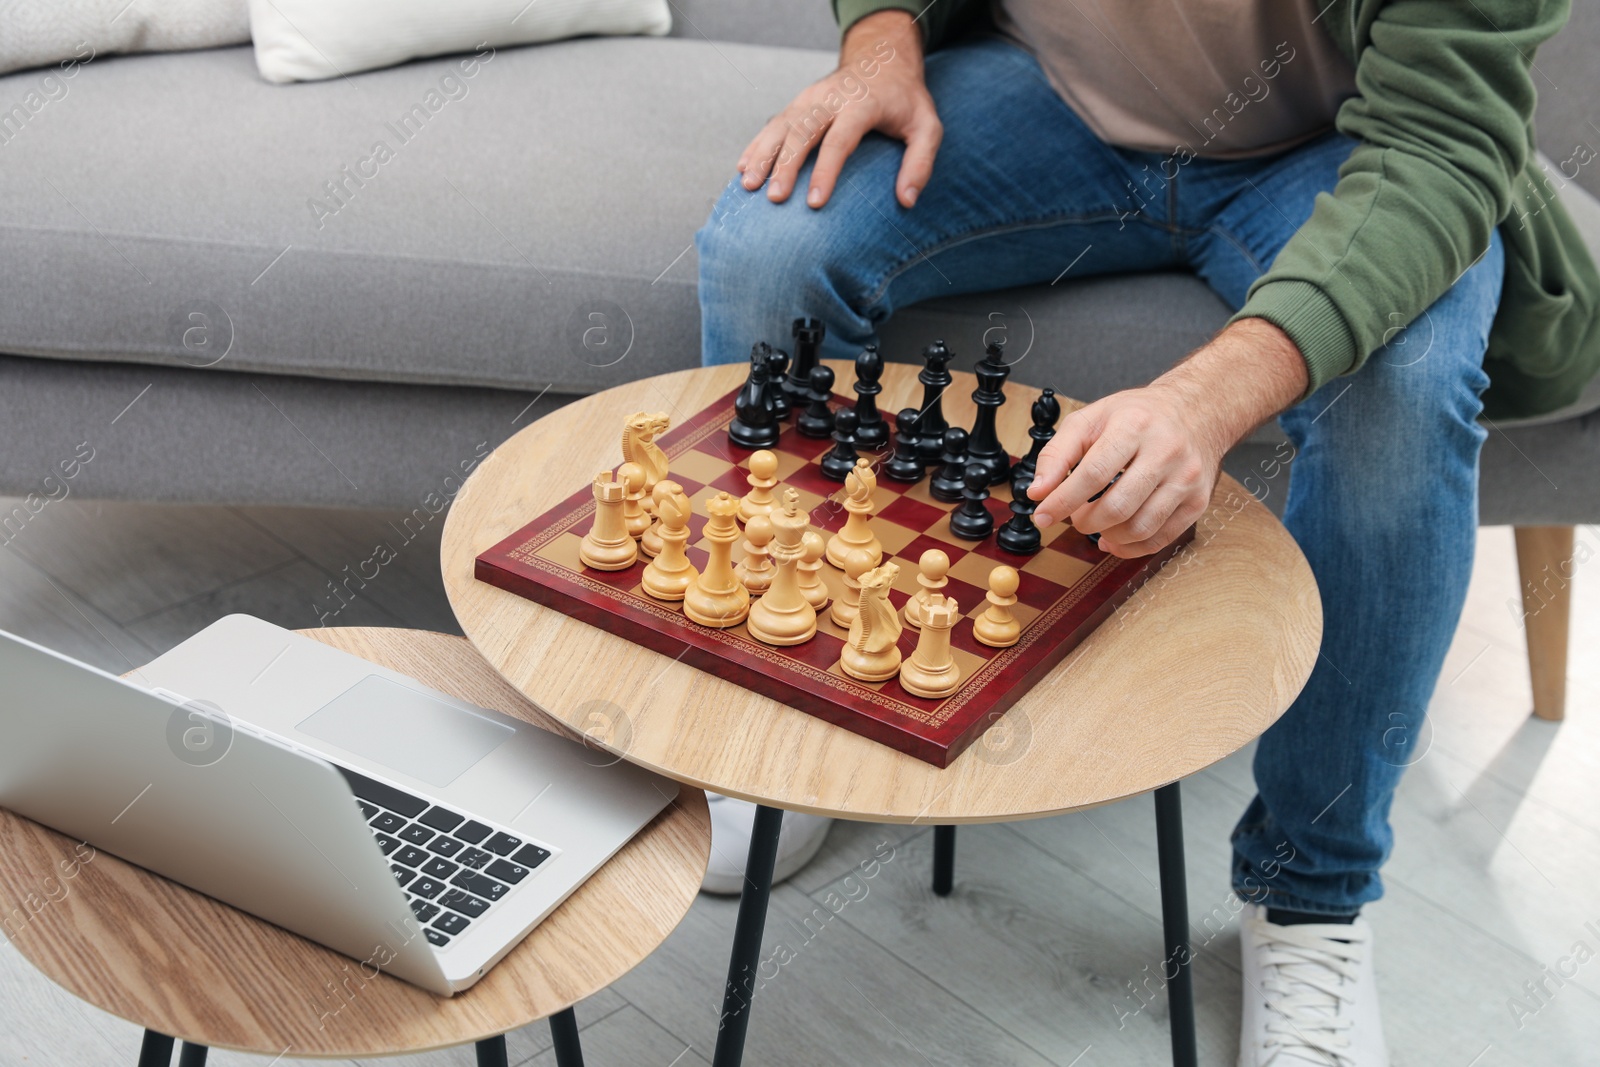 Photo of Man playing chess with partner through online video chat in living room, closeup